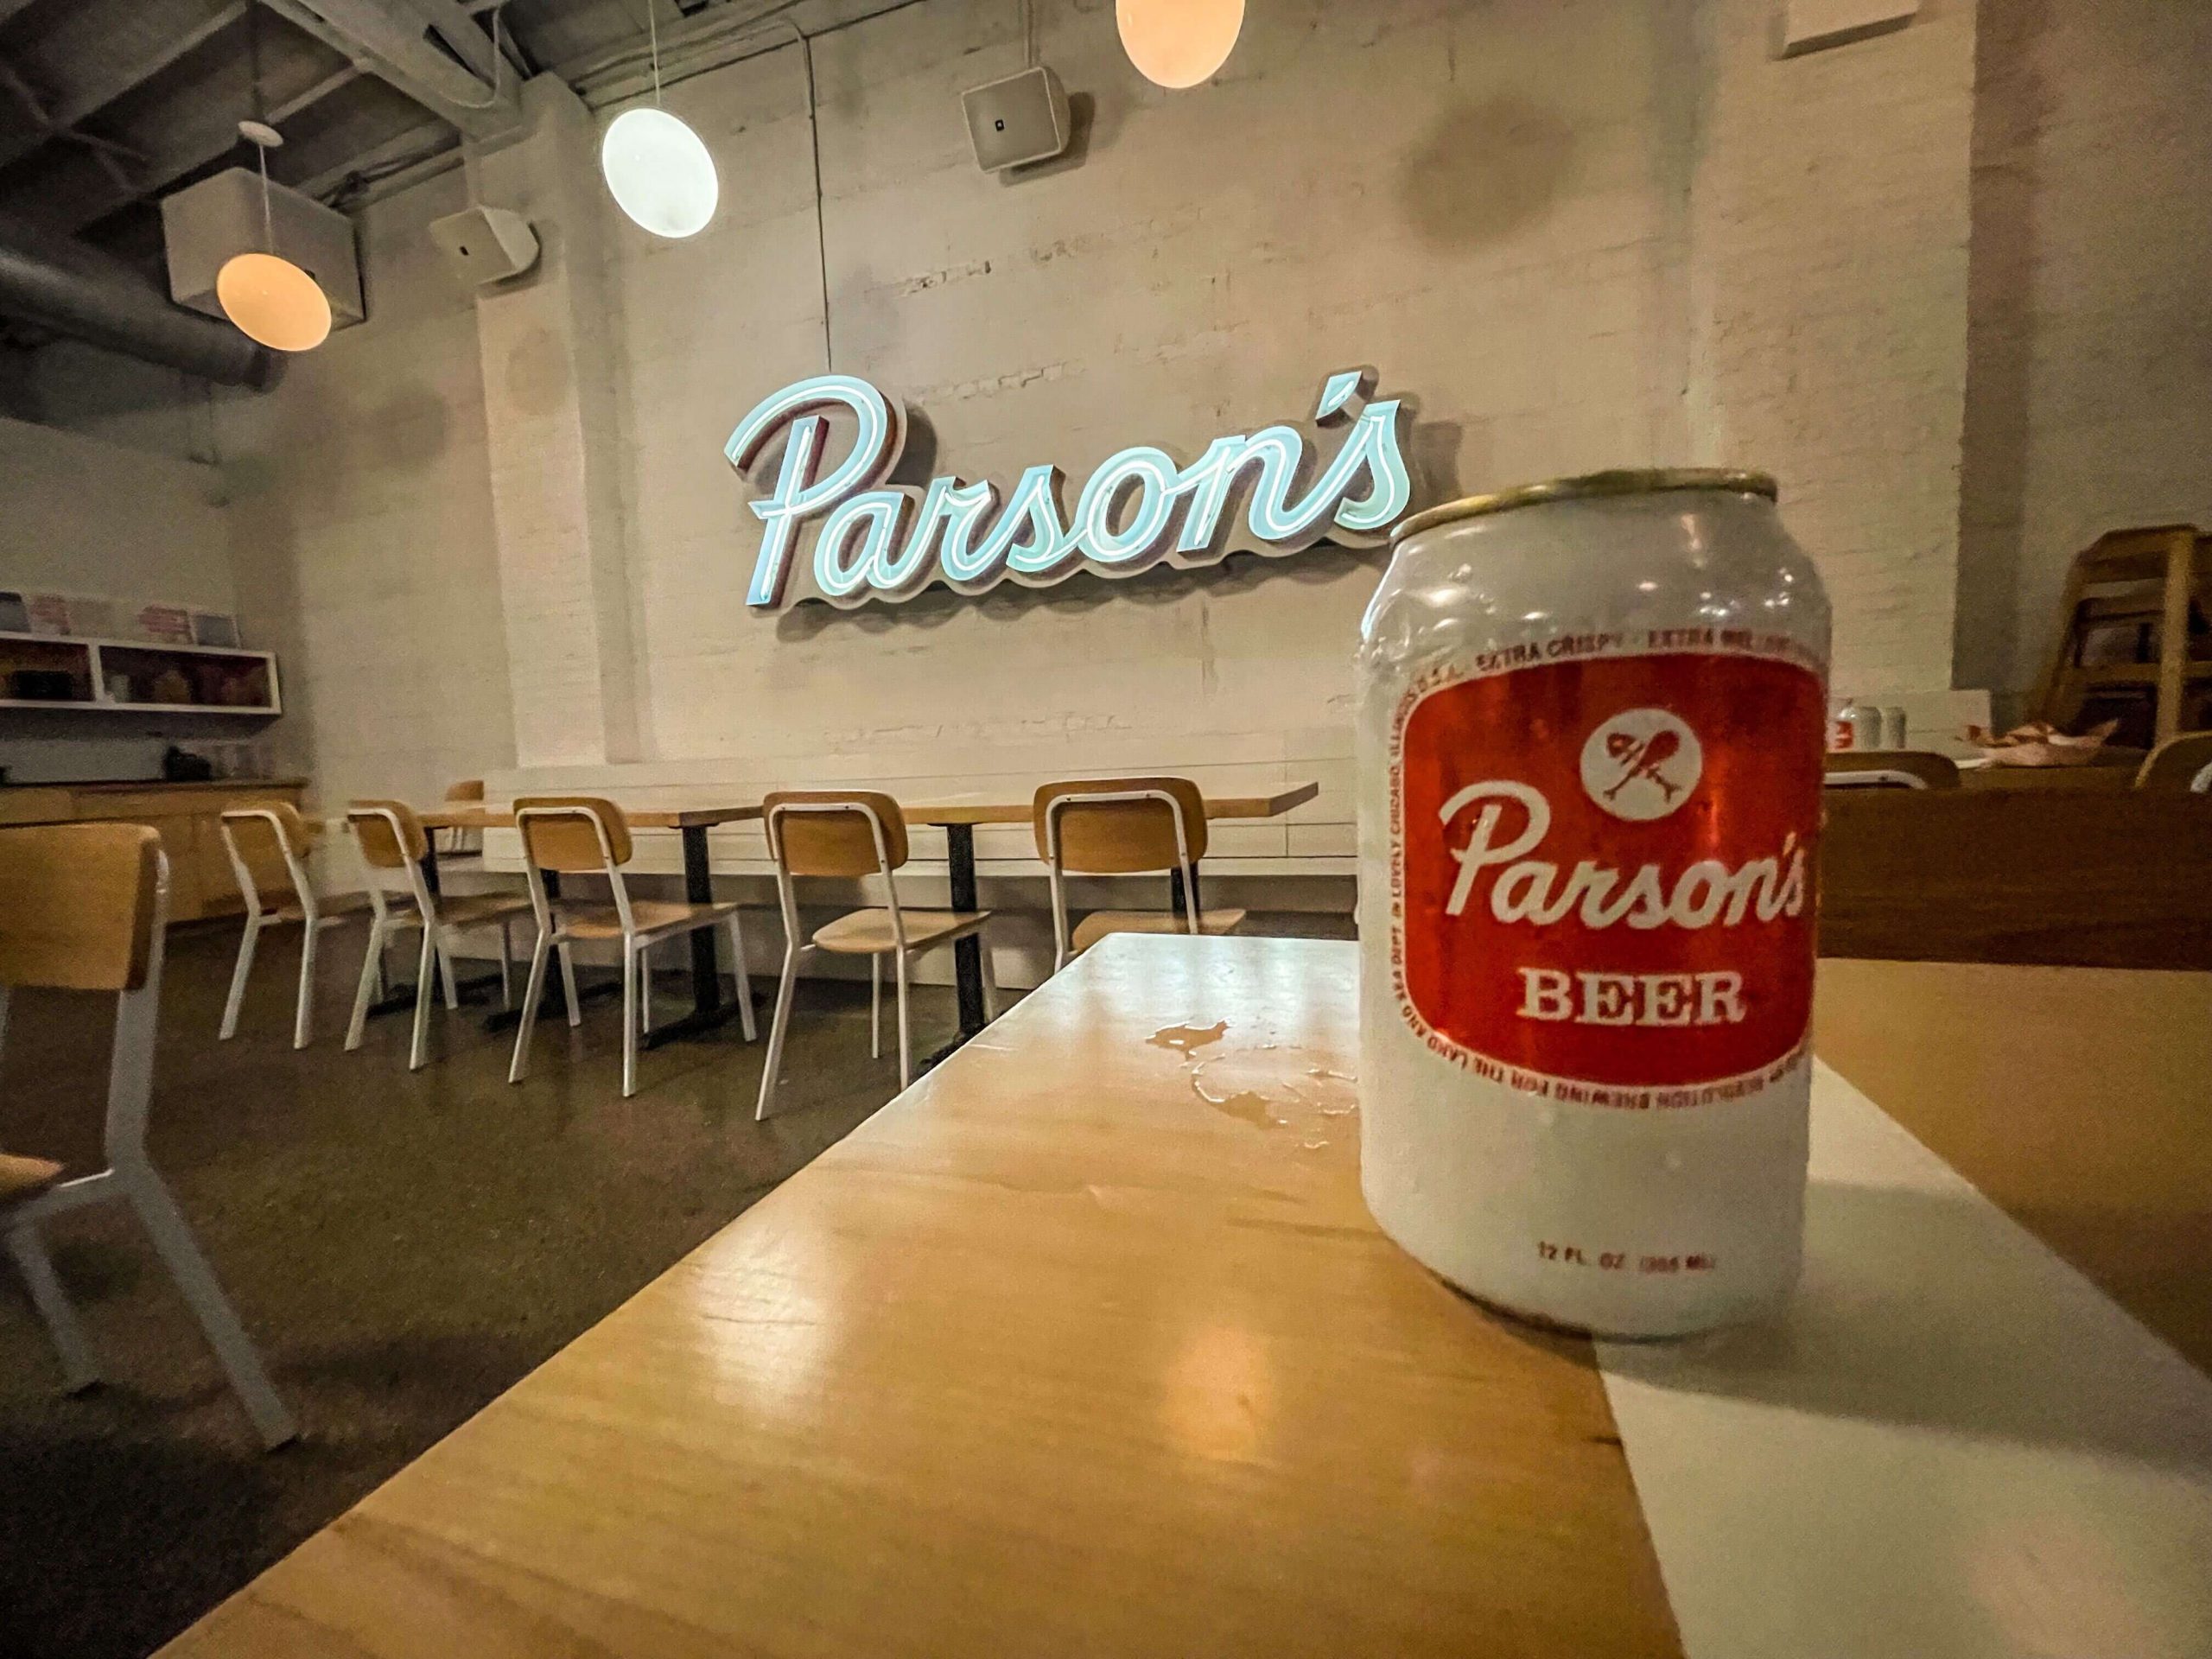 Parson's Beer